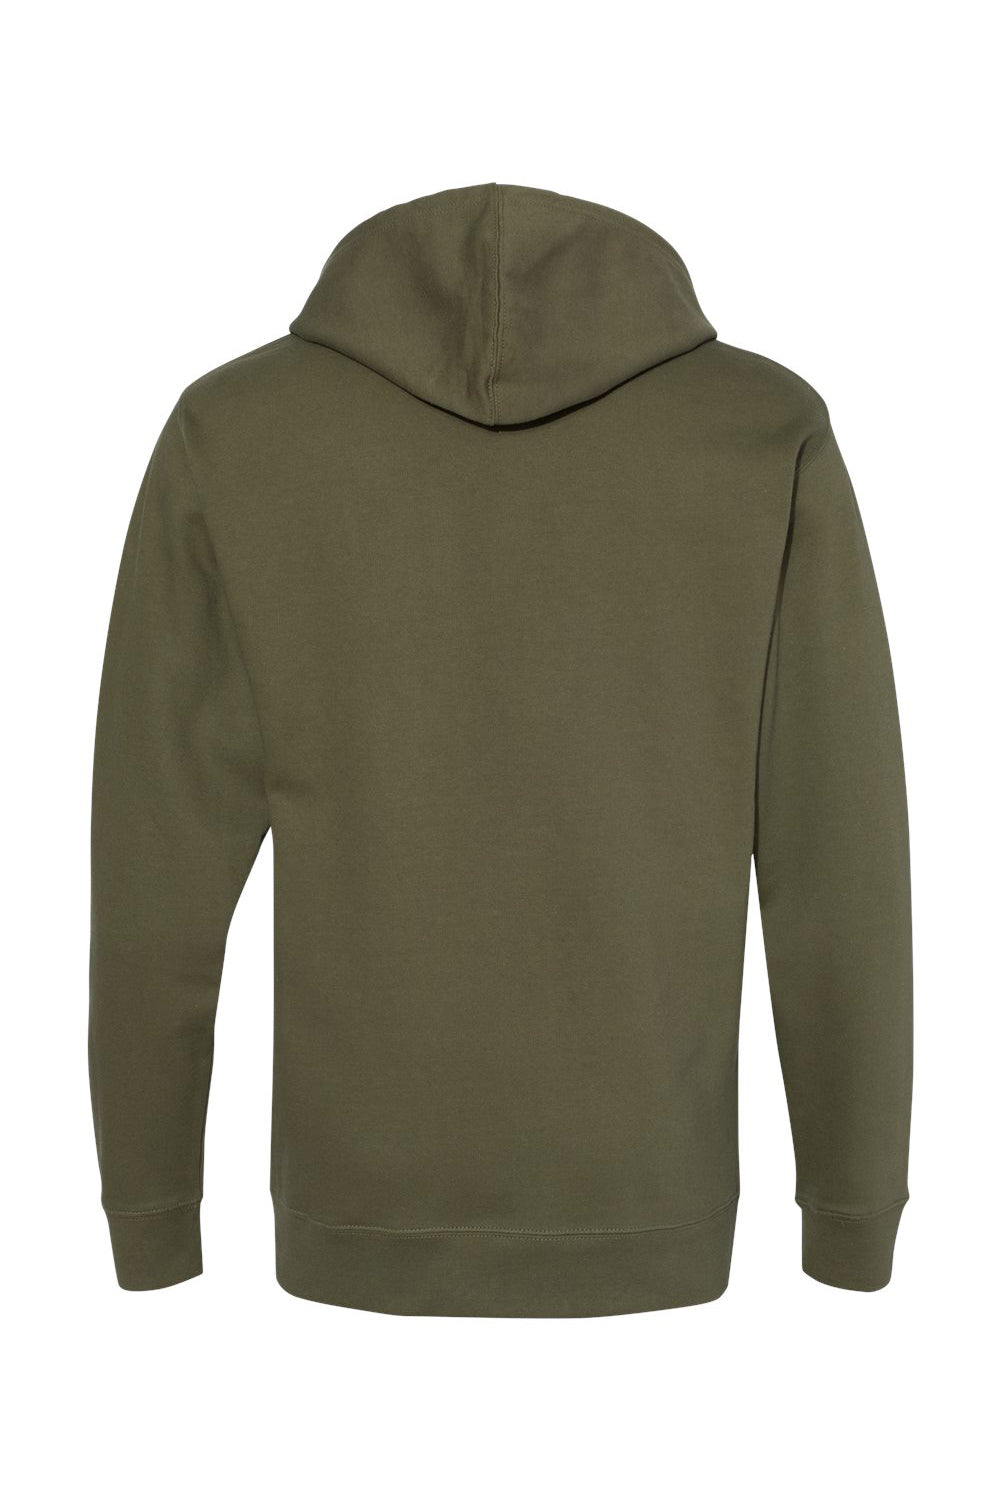 Independent Trading Co. SS4500 Mens Hooded Sweatshirt Hoodie Army Green Flat Back